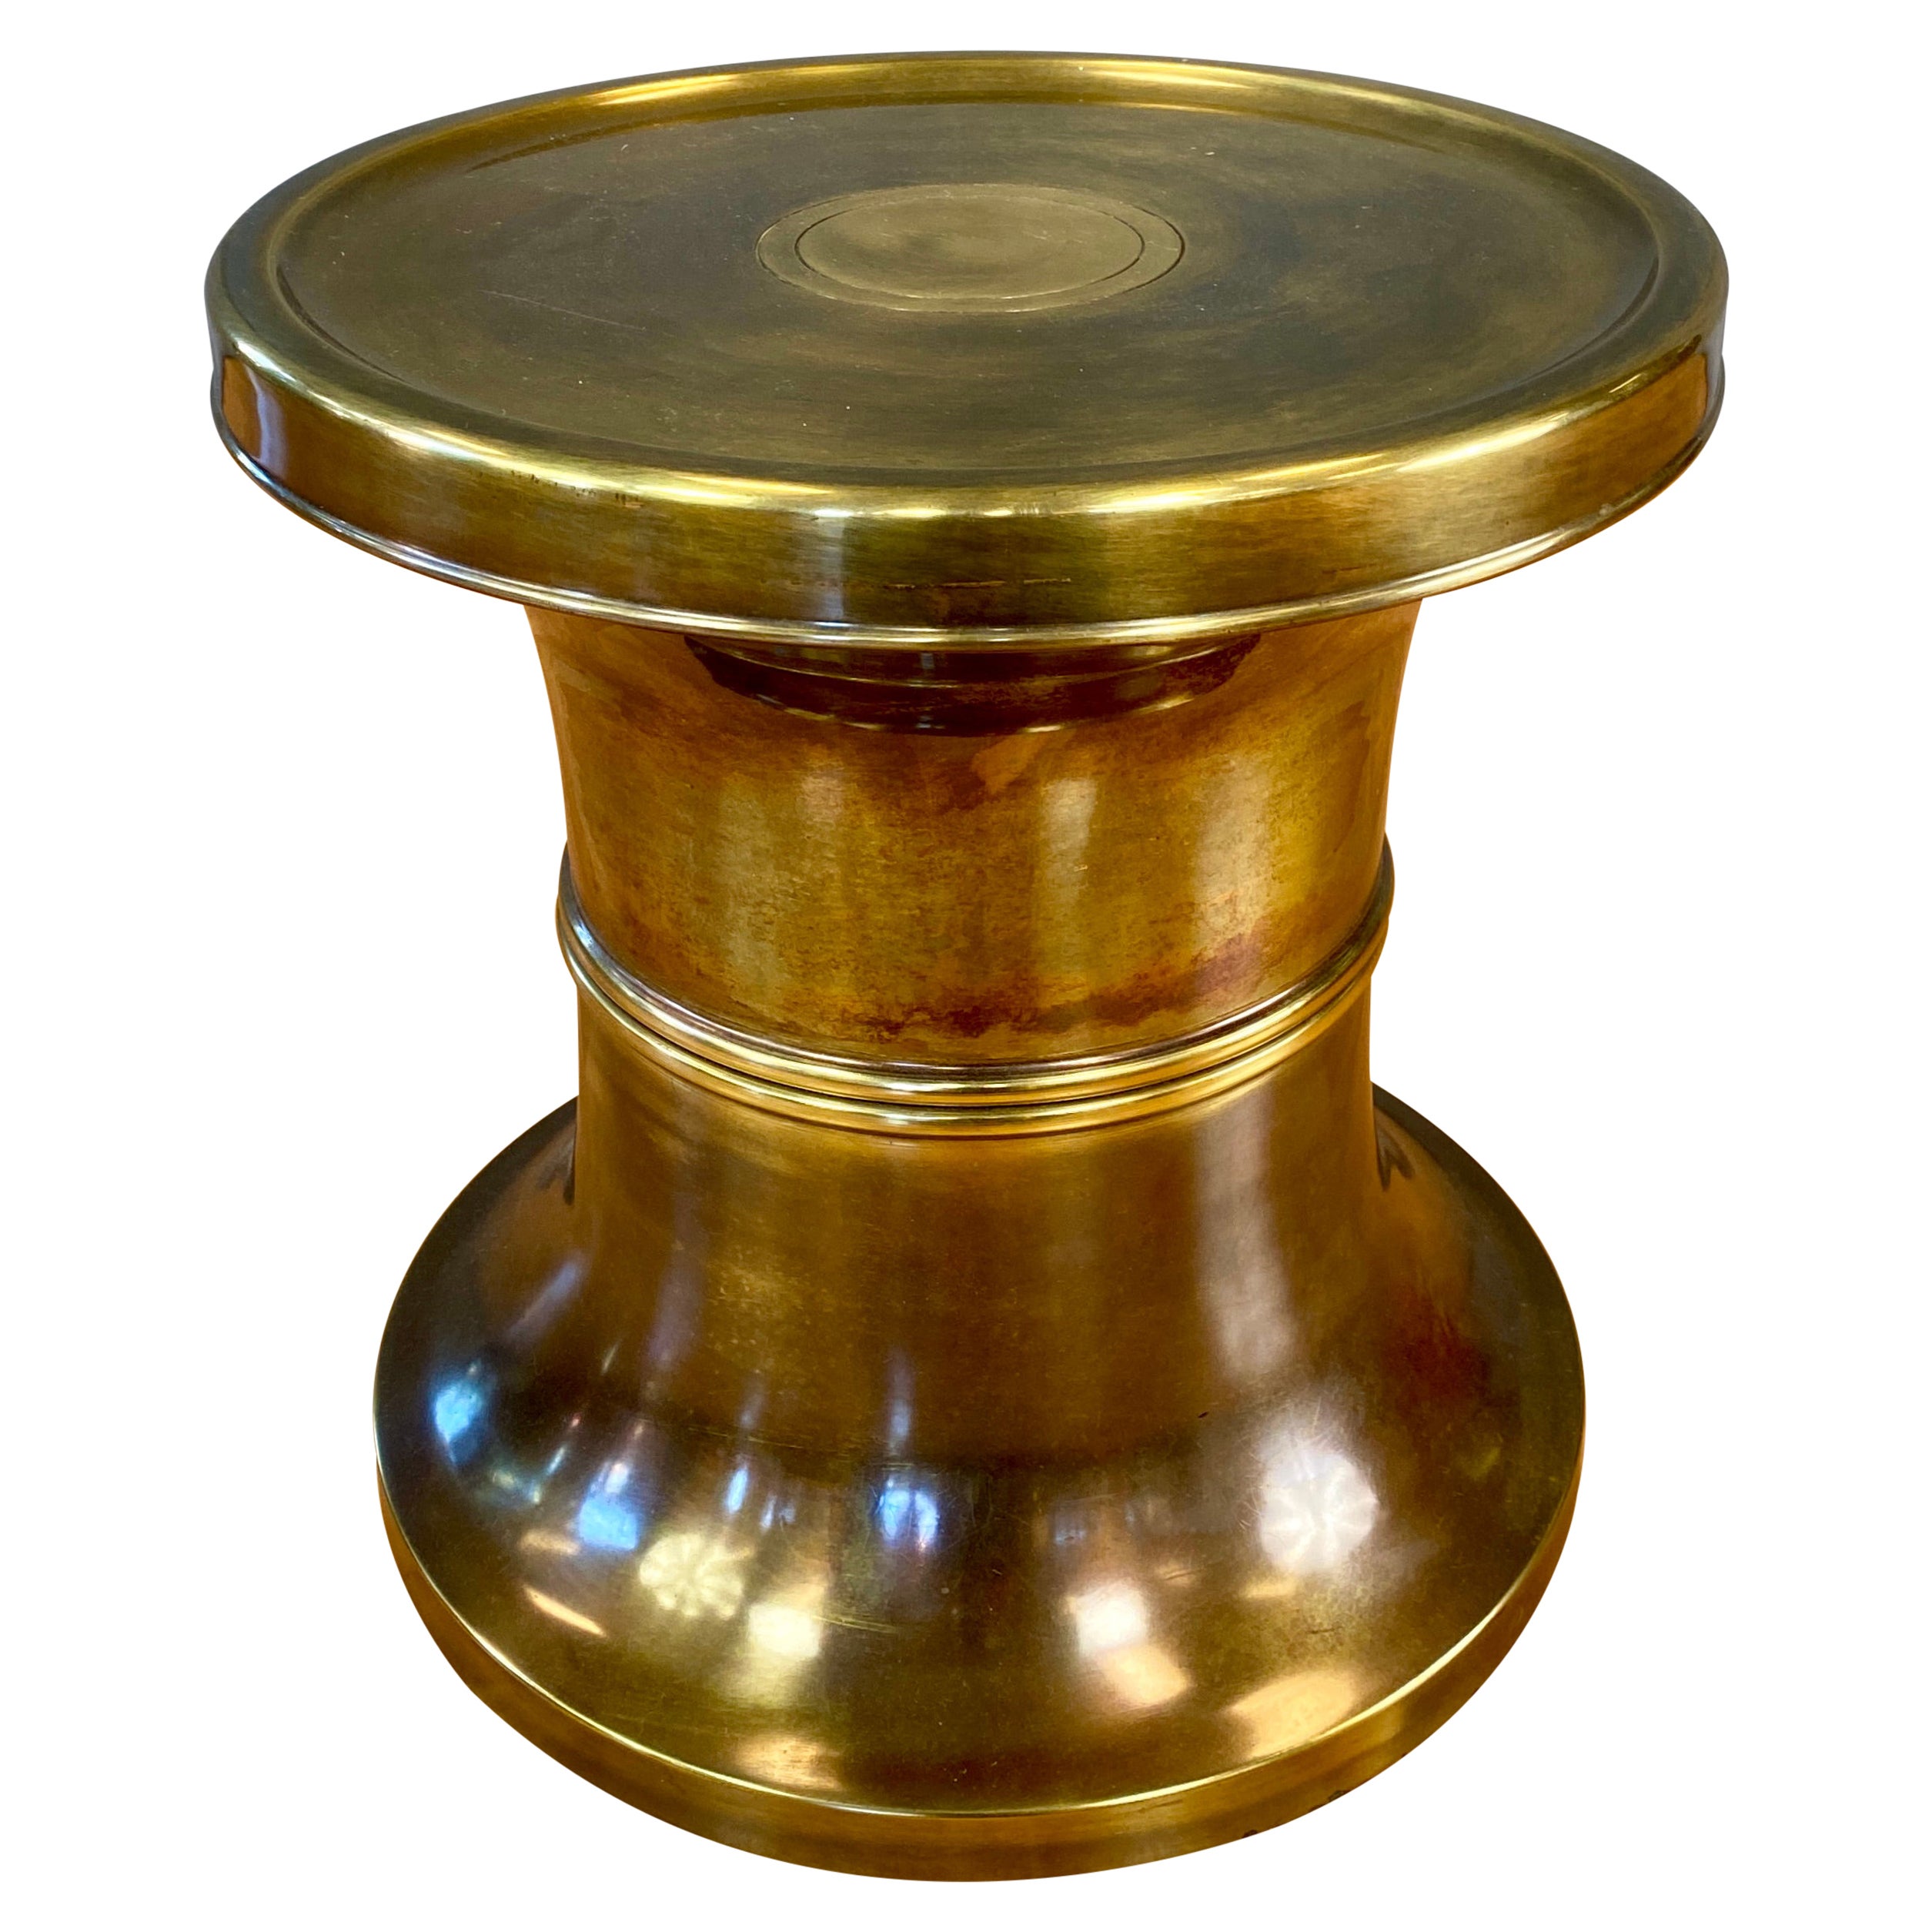 Mastercraft Brass Stool or a Low Side Table